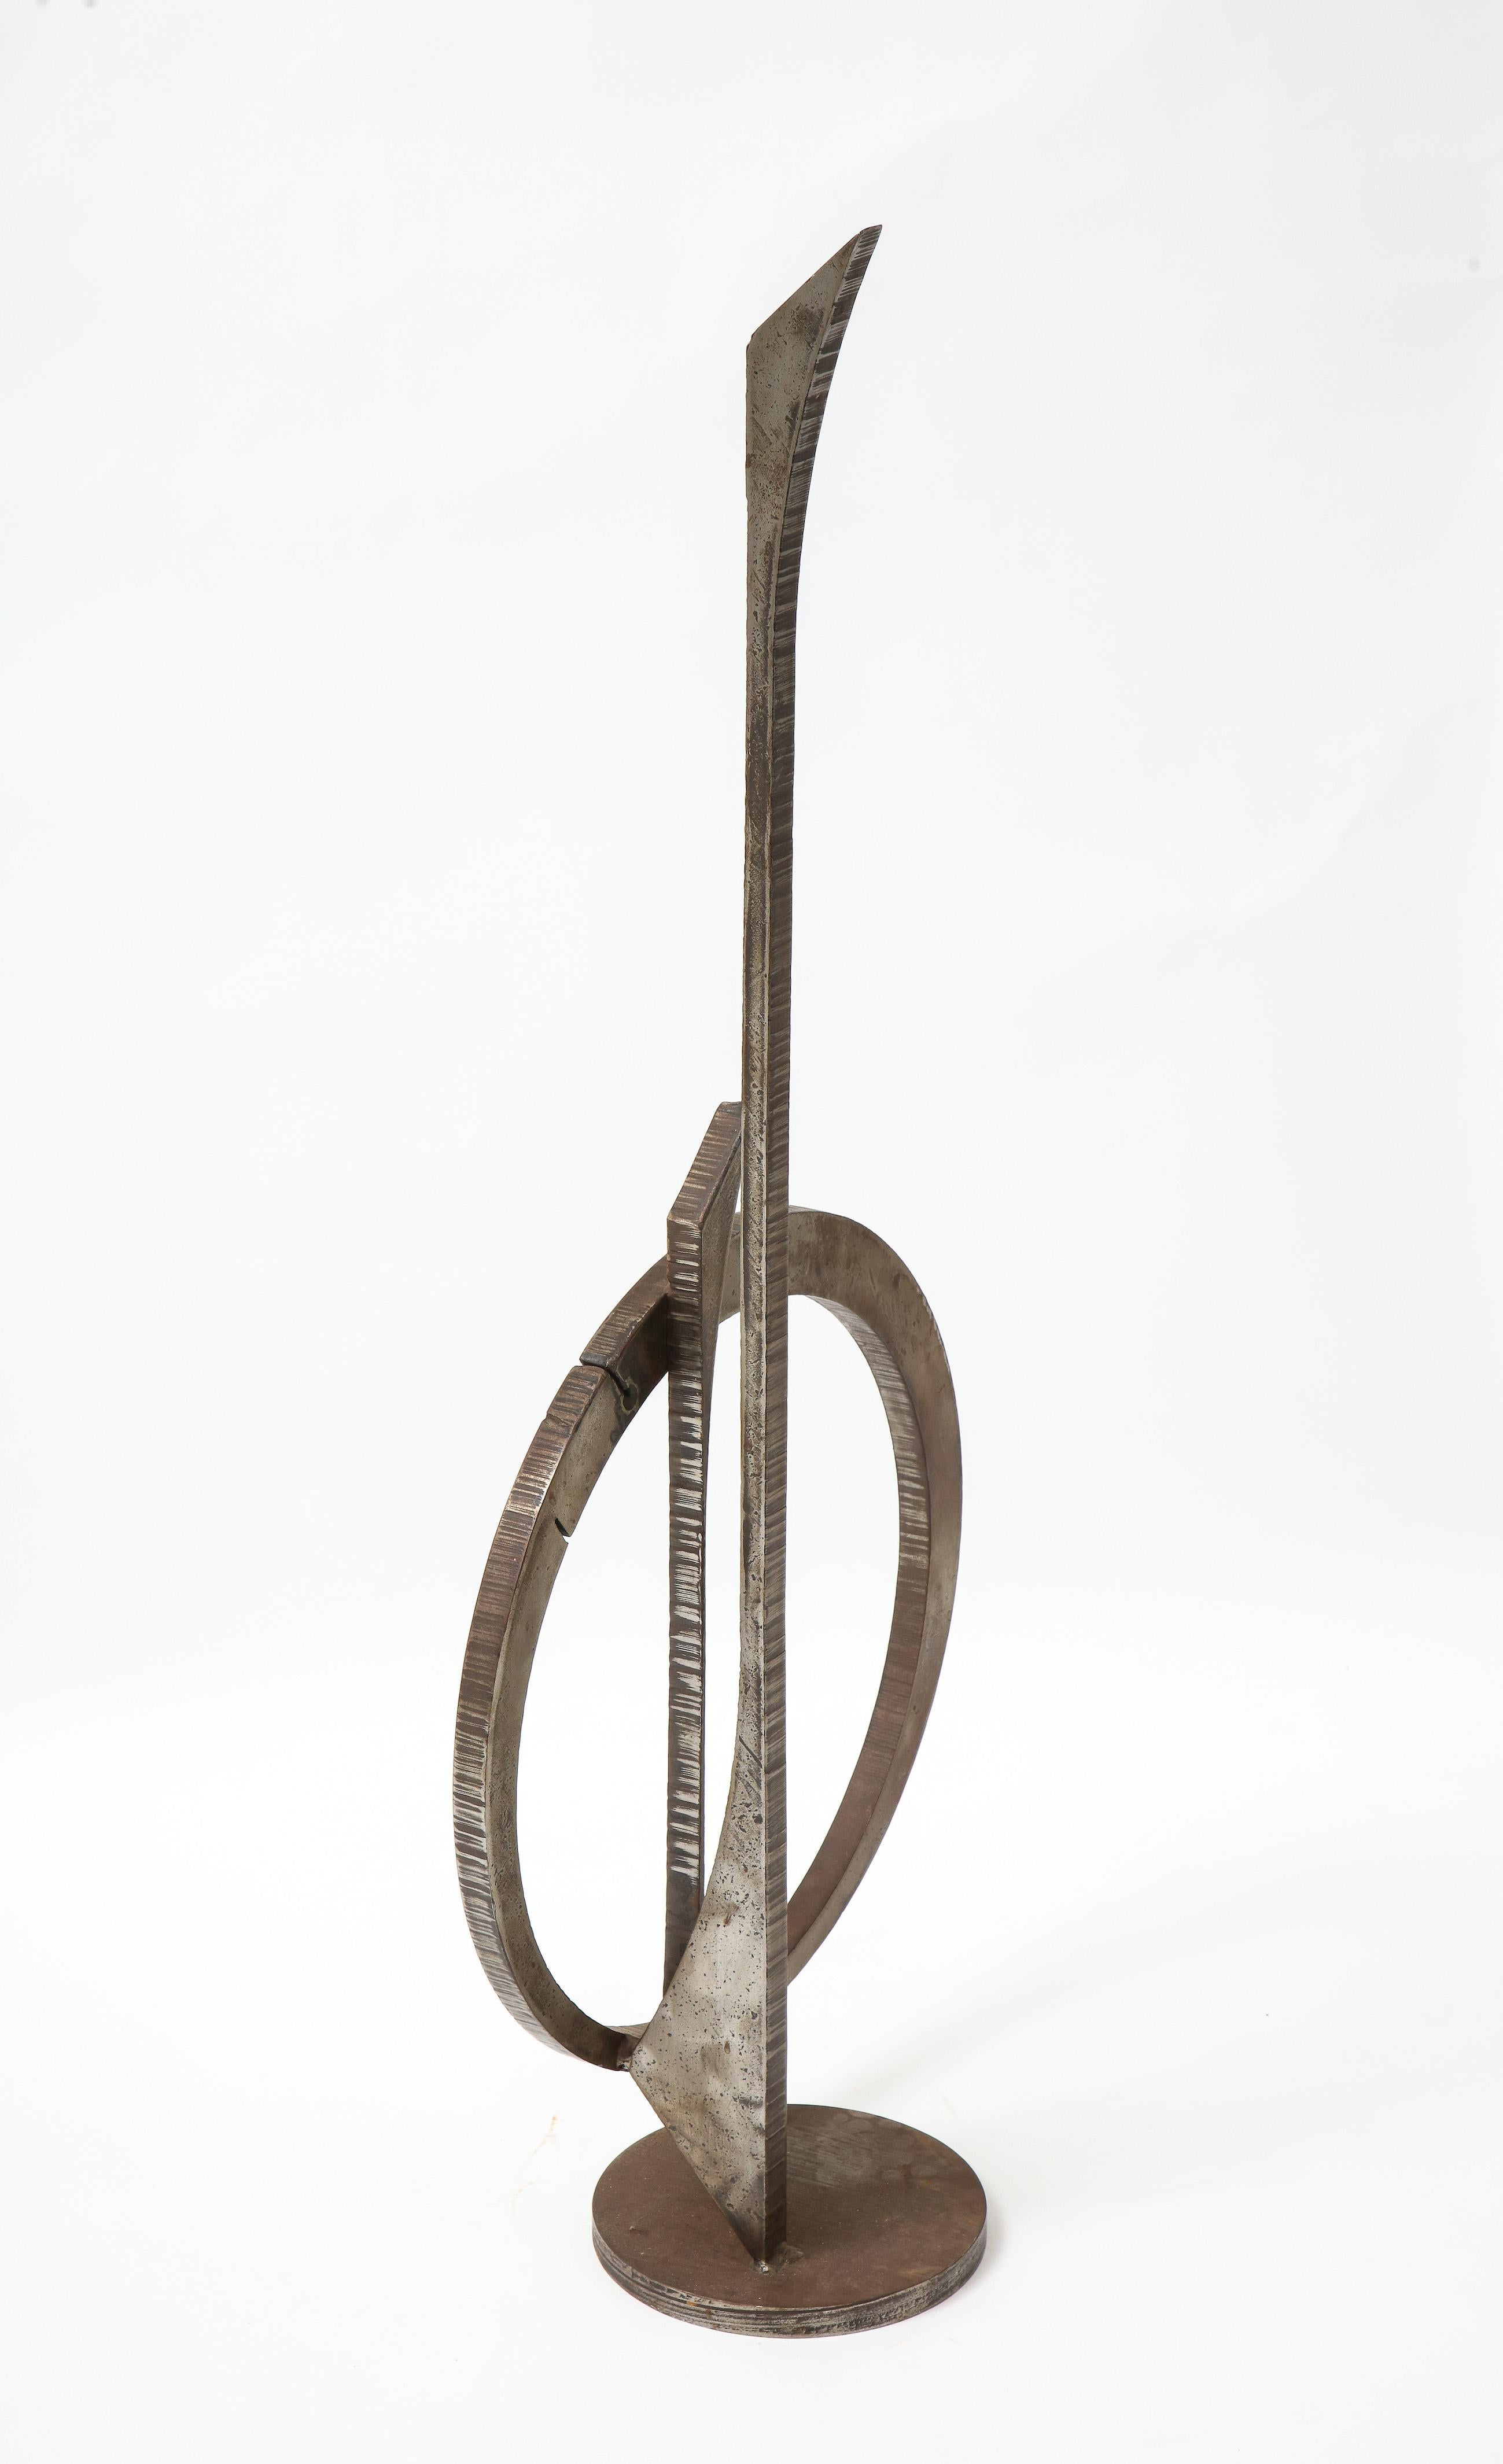 Steel Wrought Iron Sculpture by Amilar Zannoni For Sale